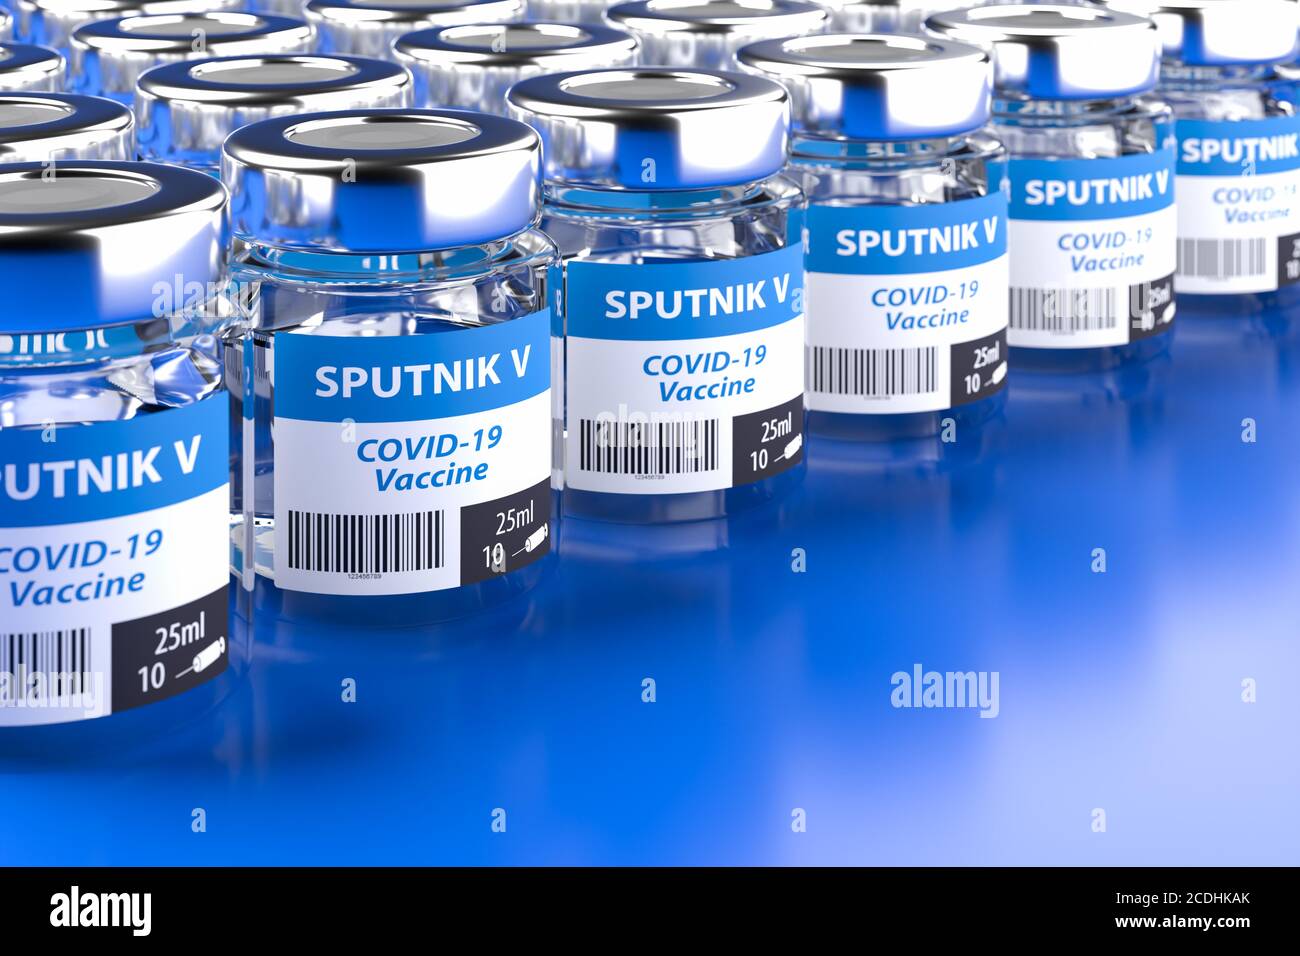 Sputnik V vaccination against COVID-19: Rows of glass containers with 10 doses of vaccination Stock Photo